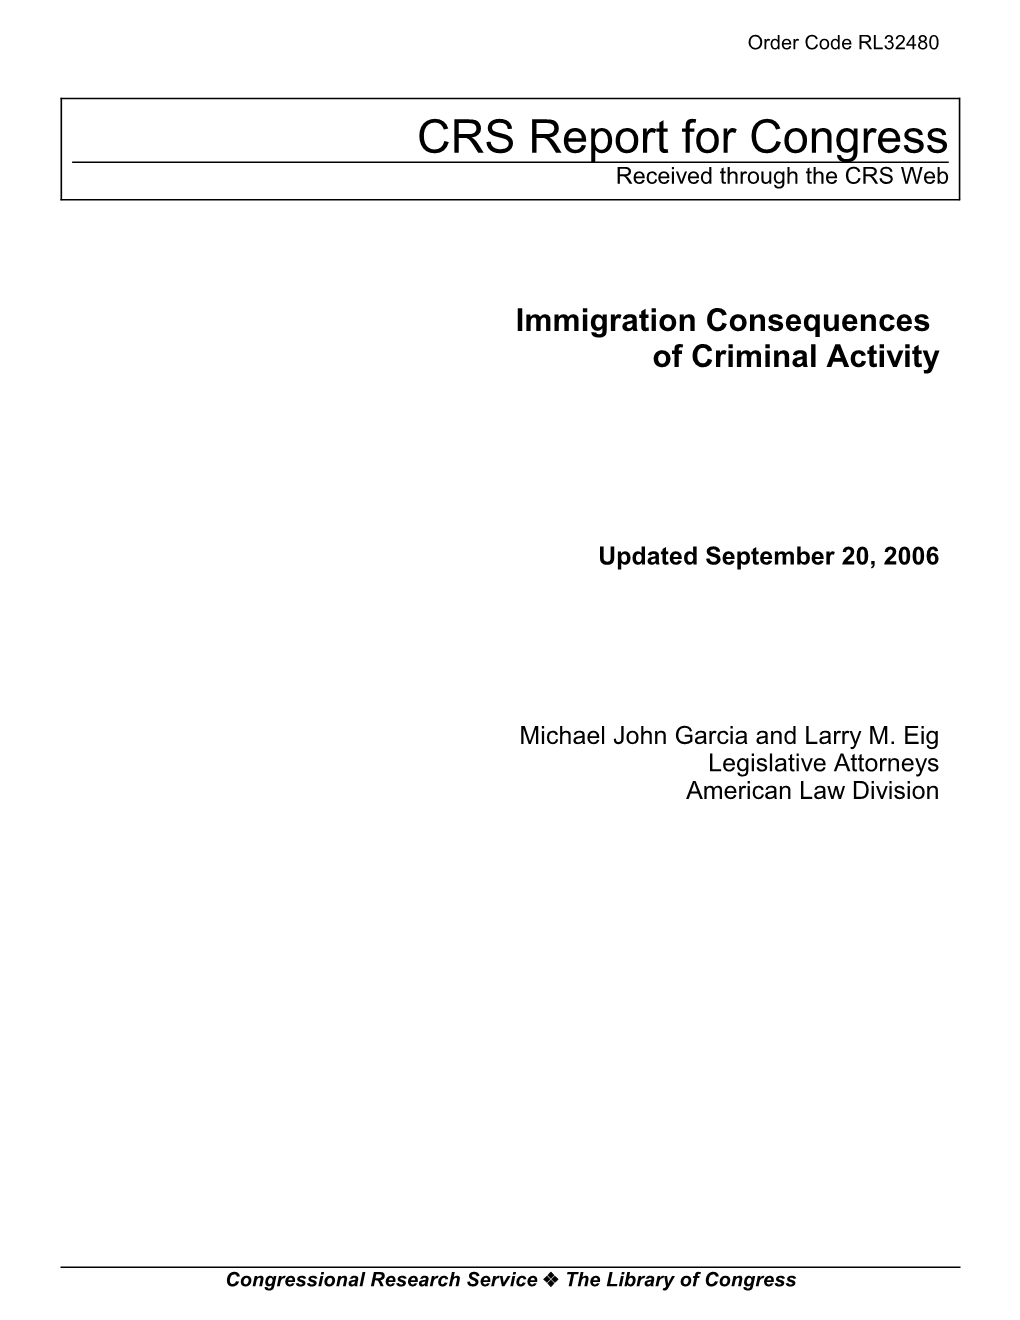 Immigration Consequences of Criminal Activity